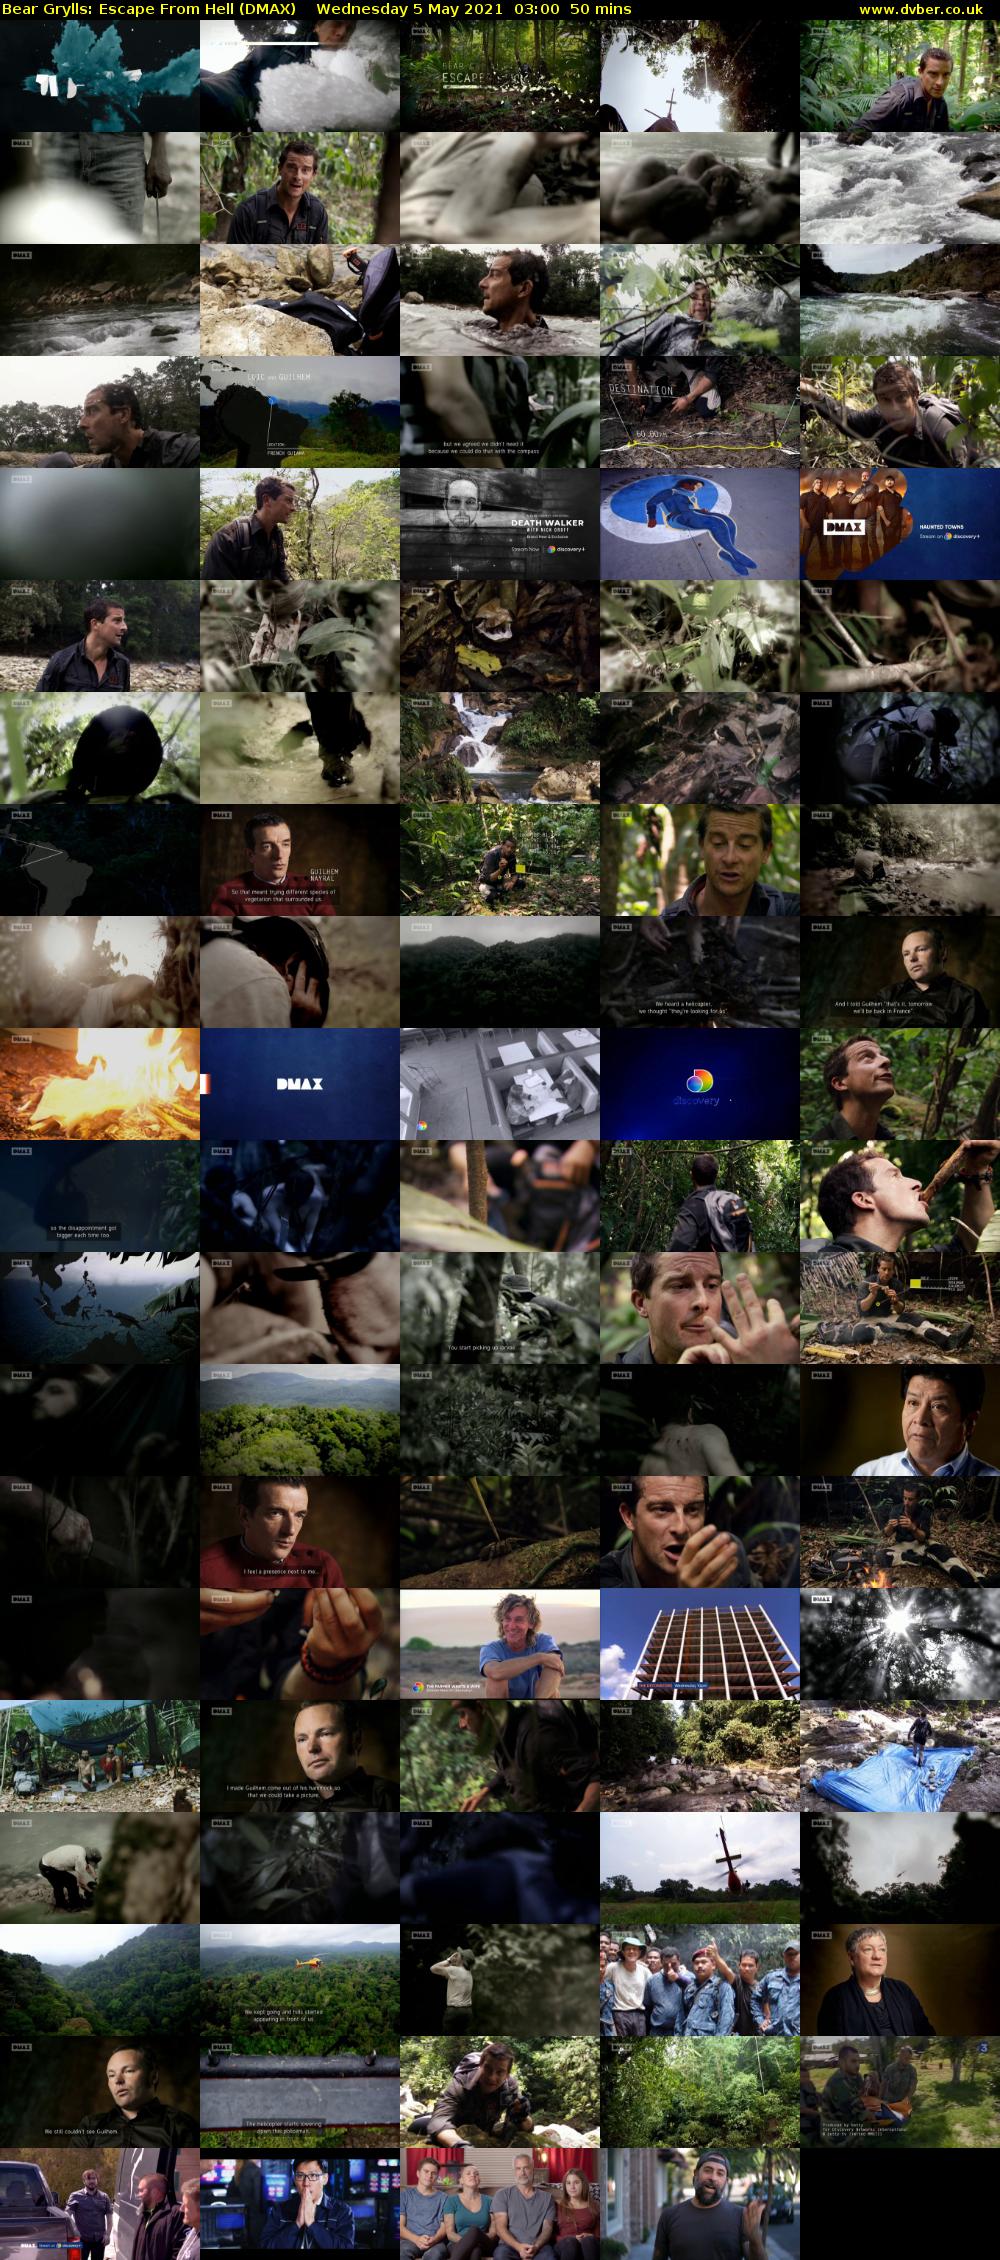 Bear Grylls: Escape From Hell (DMAX) Wednesday 5 May 2021 03:00 - 03:50